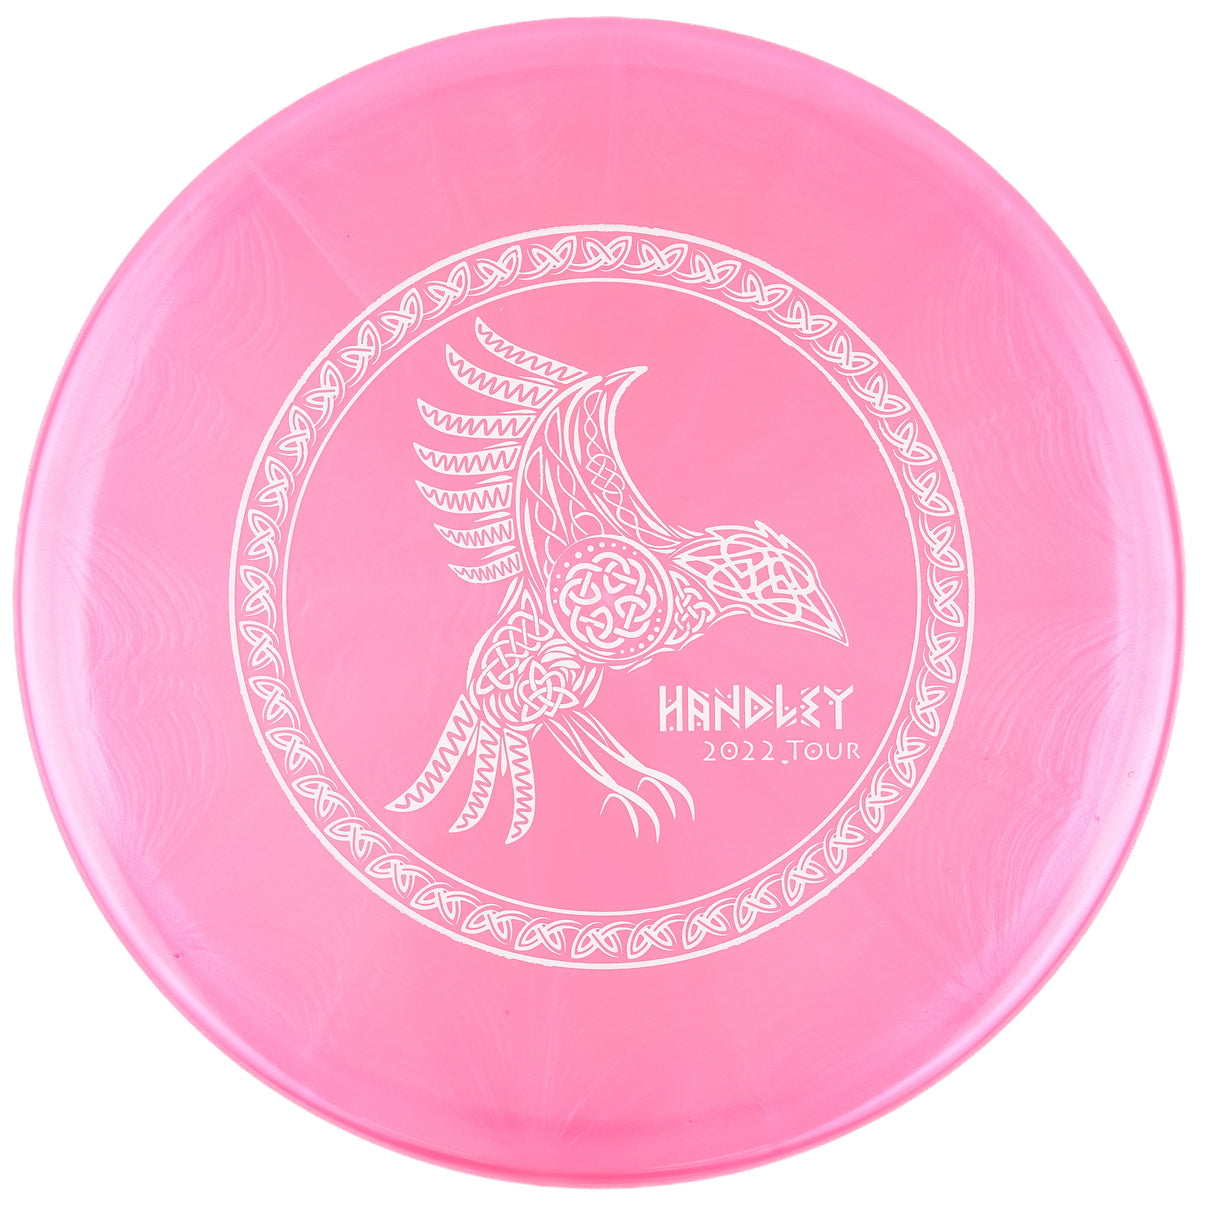 Dynamic Discs Suspect - Holyn Handley 2022 Tour Series Lucid Chameleon 176g | Style 0001